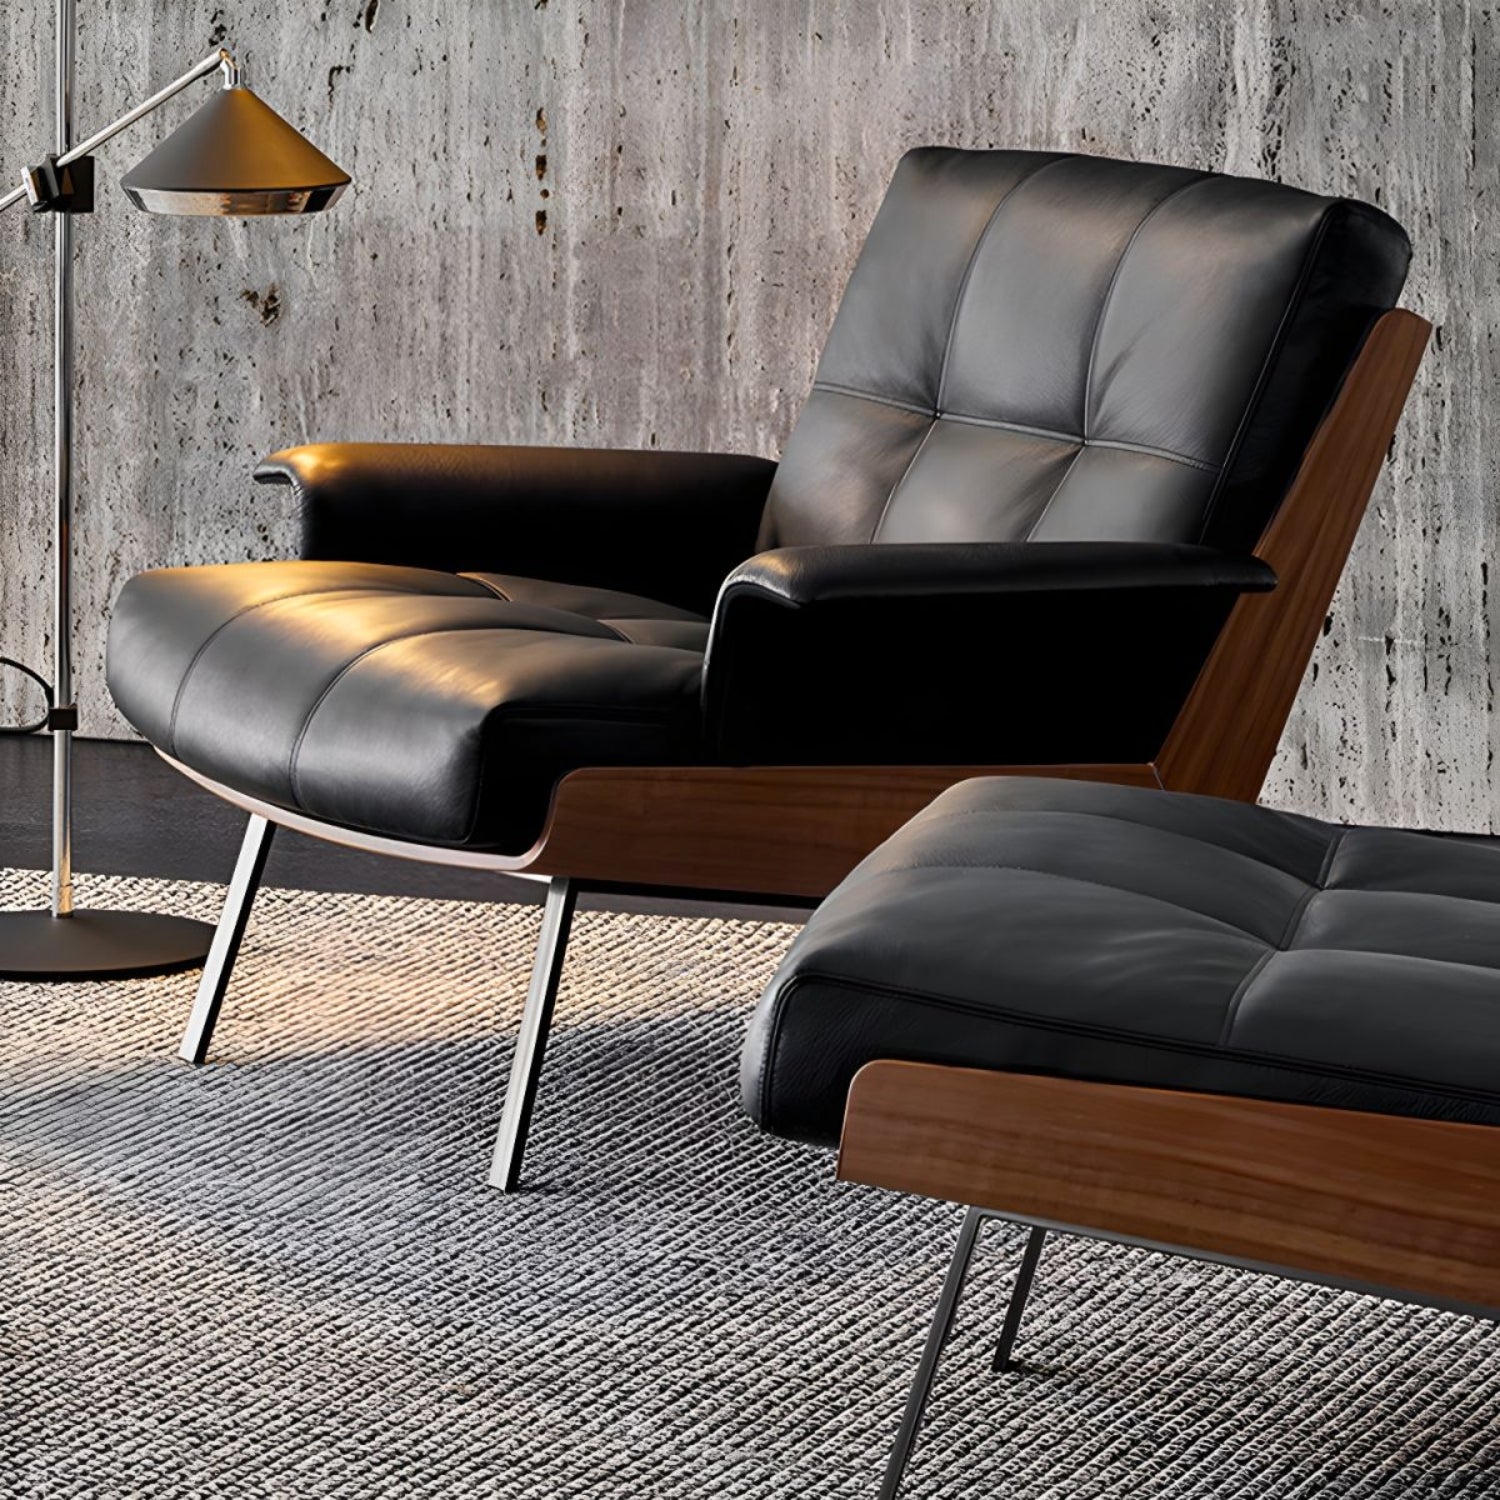 An exquisite Replica Daiki black leather lounge armchair featuring stylish wooden legs, offering both comfort and a touch of class.